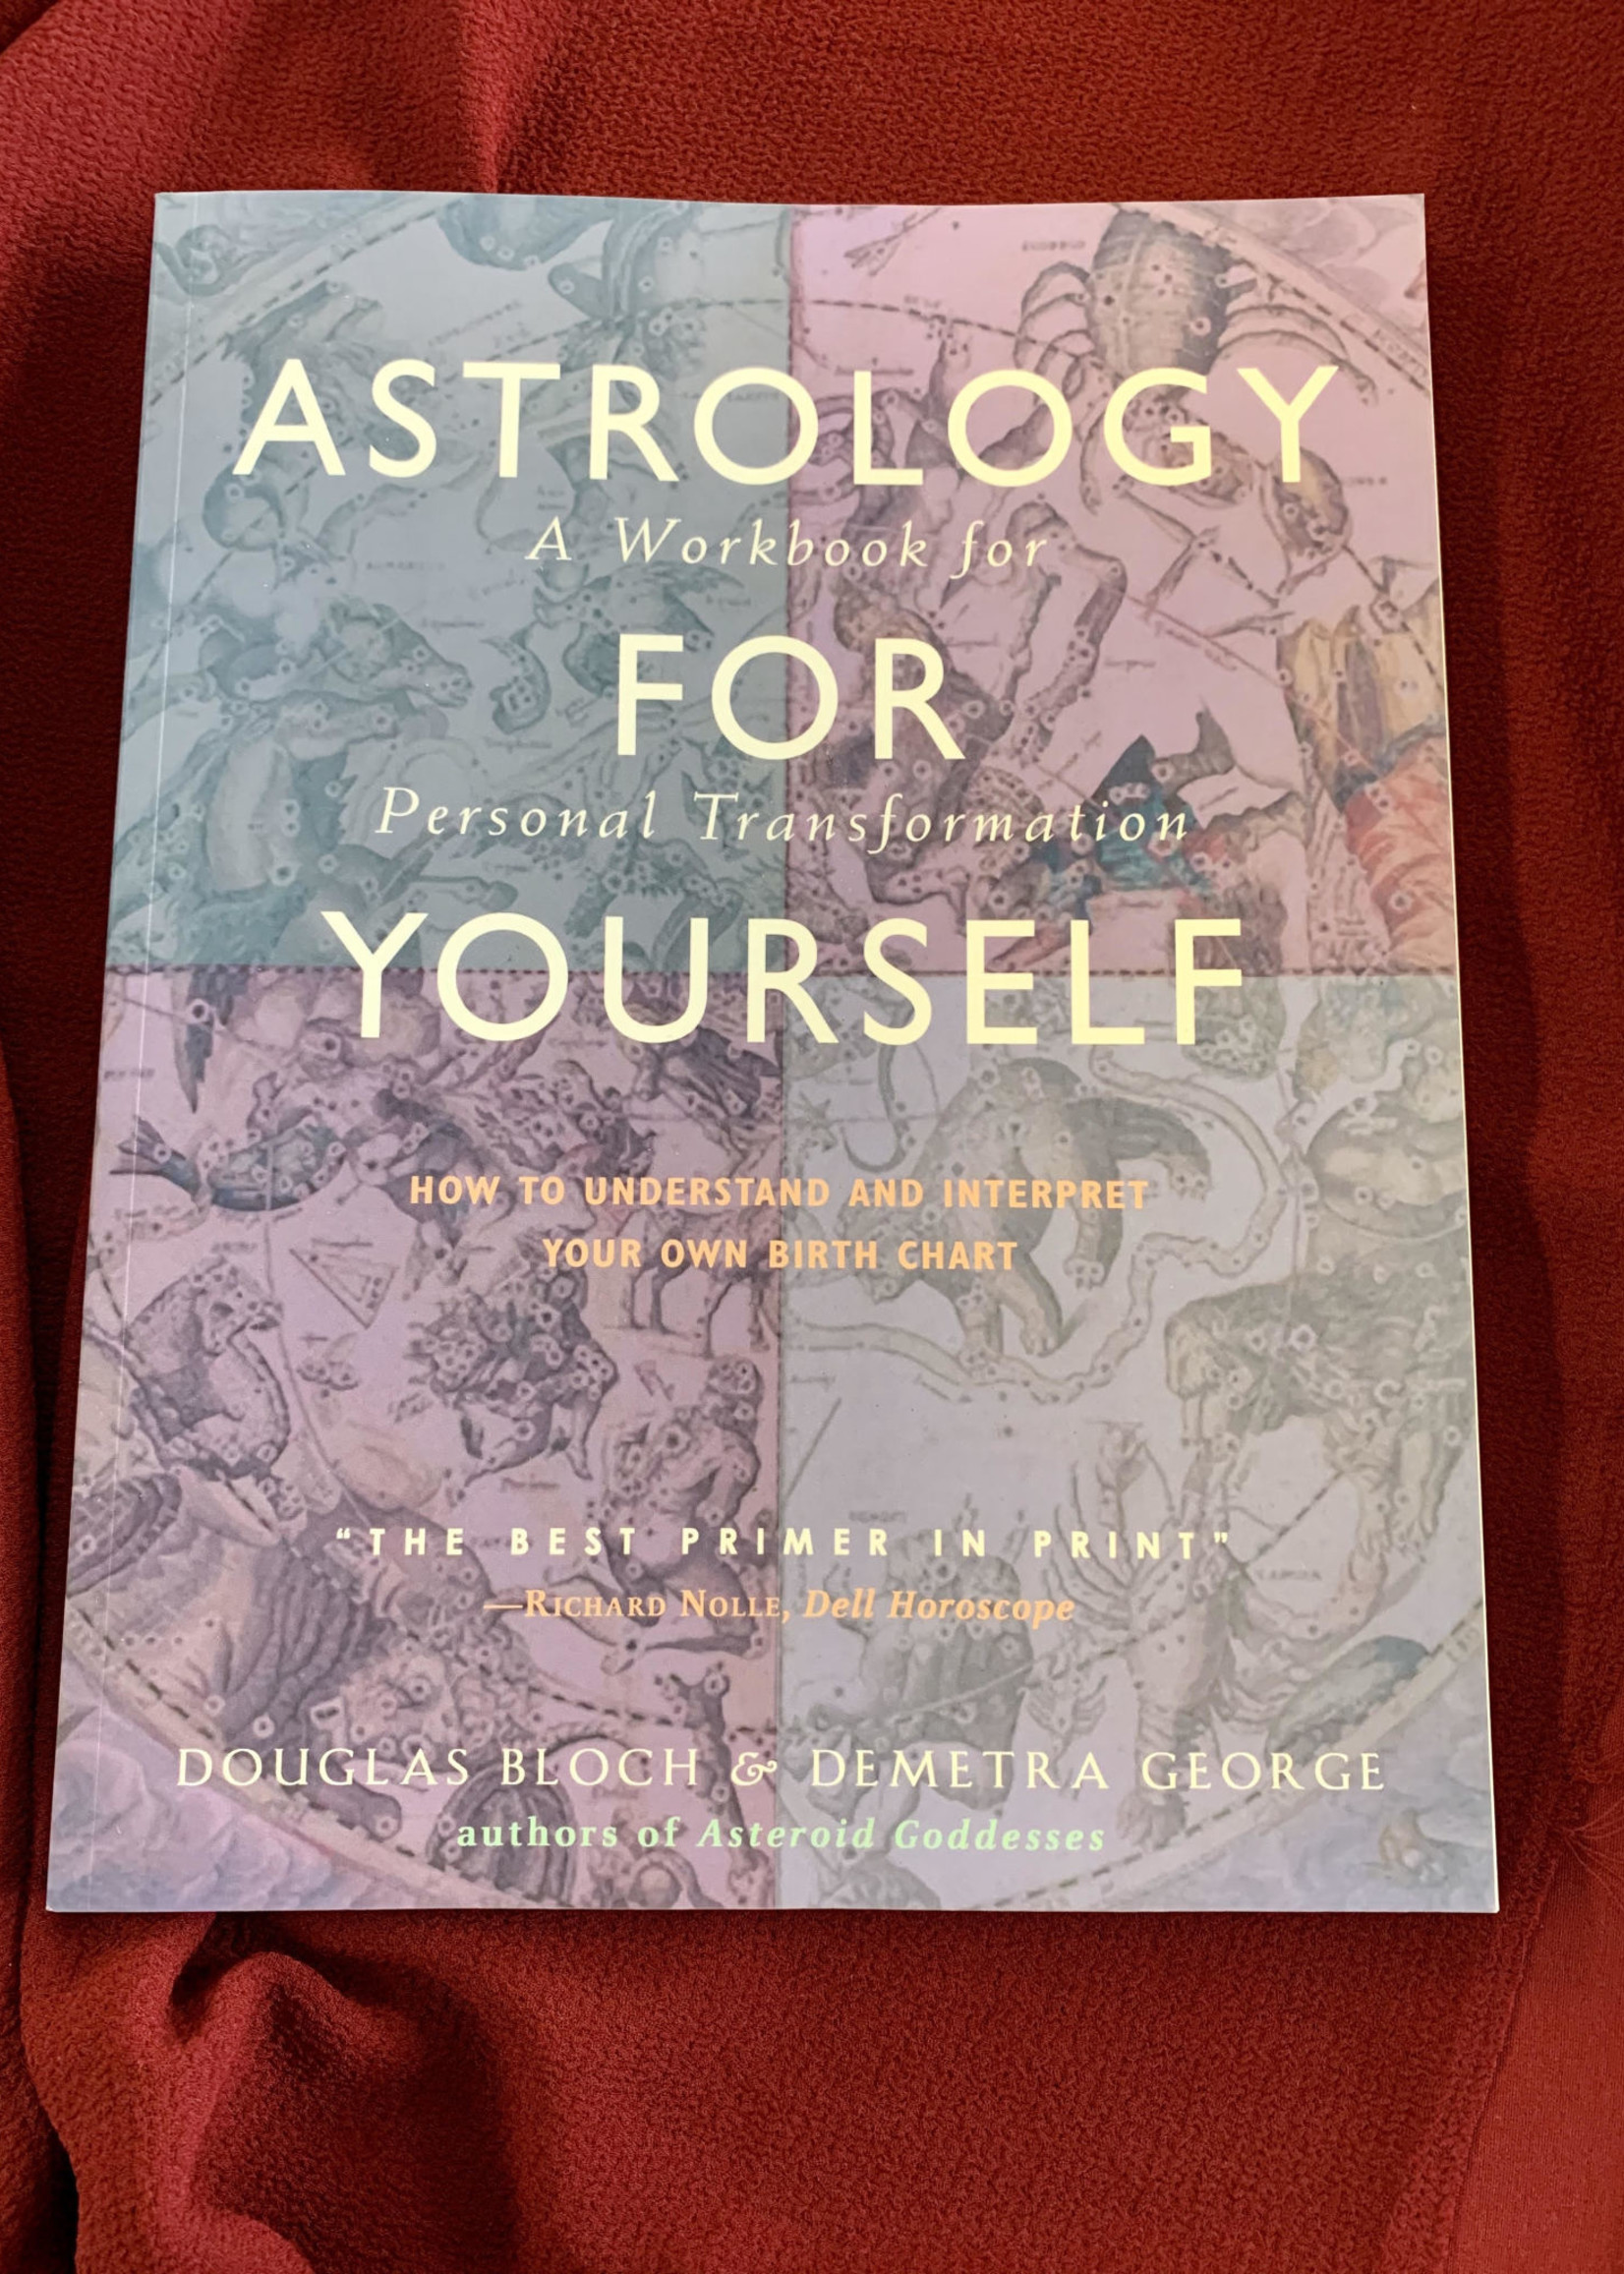 Astrology for Yourself How to Understand and Interpret Your Own Birth Chart - Douglas Bloch, Demetra George